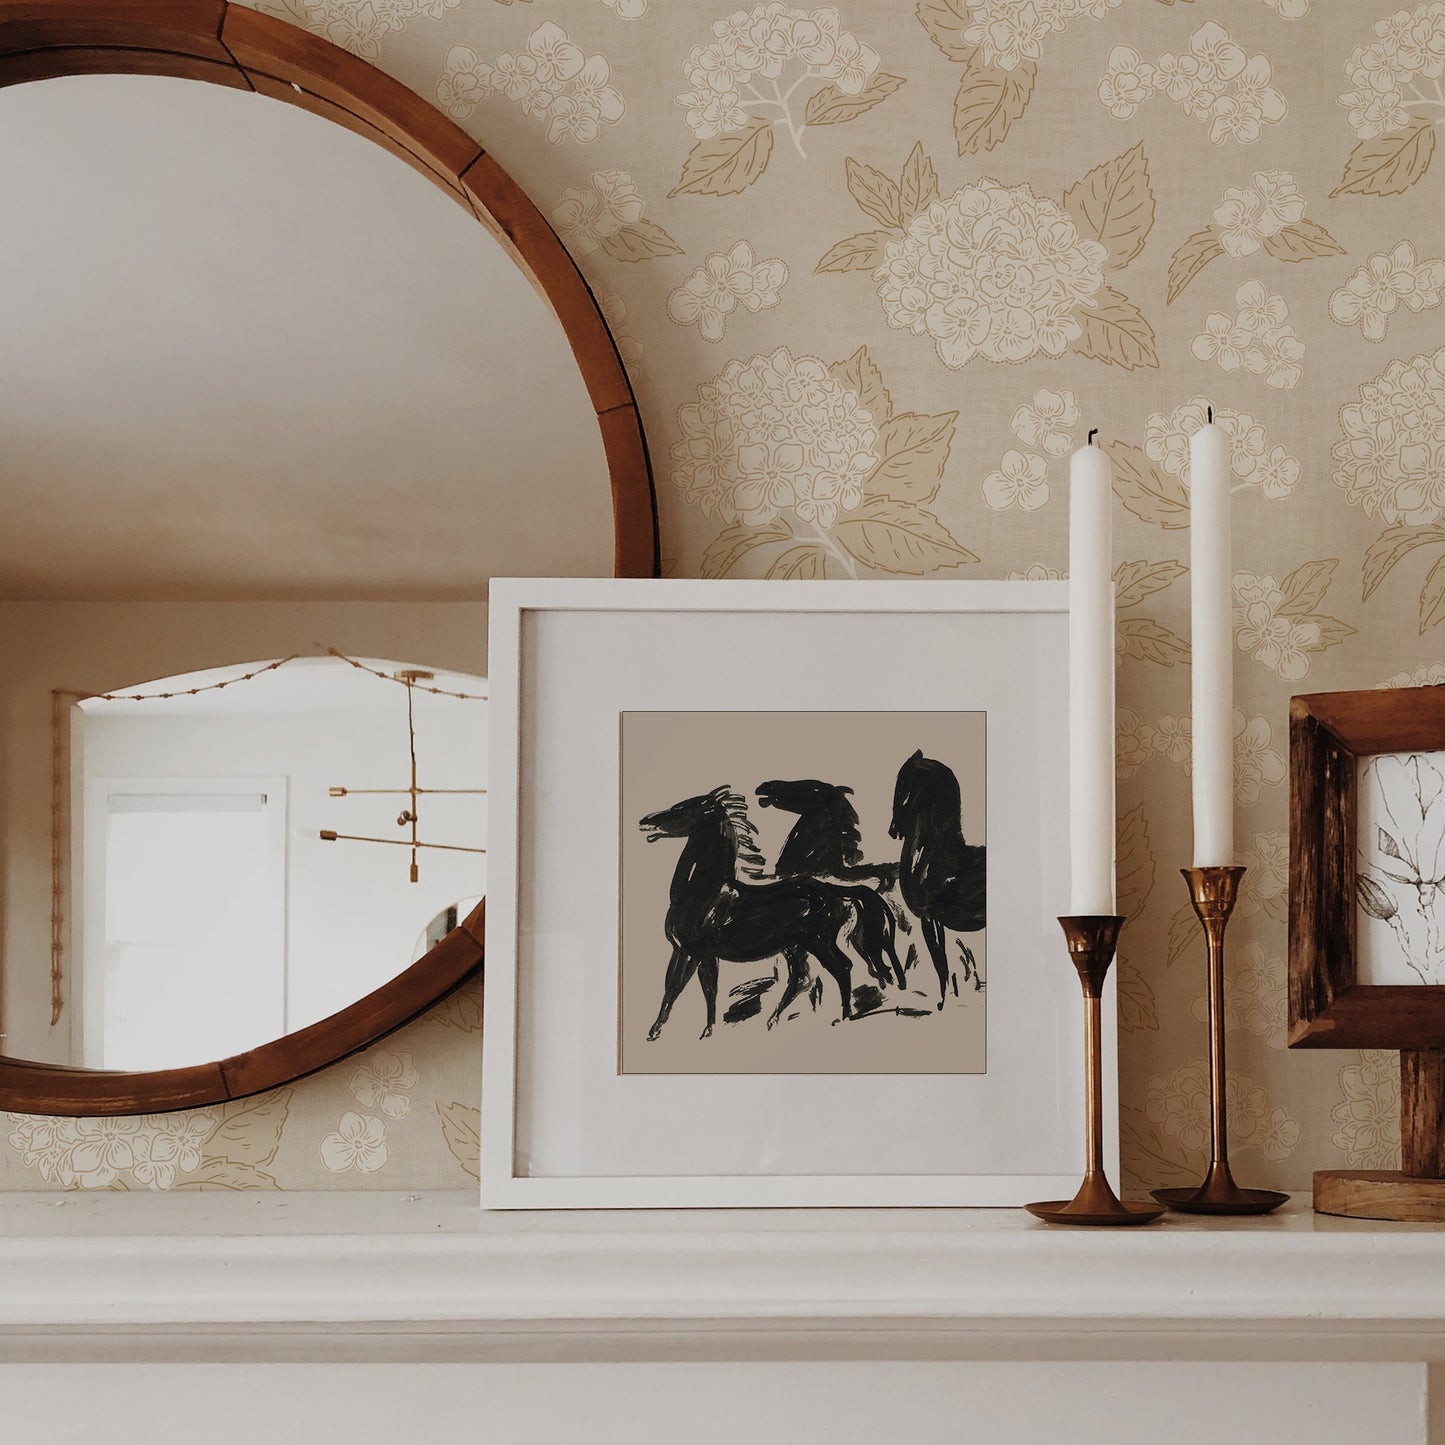 Introduce sophistication to your space with our Hydrangea Gardens Wallpaper in Sand. Big, scattered hydrangeas in a sophisticated layout create a luxurious feel. Bring a touch of art and elegance to your walls shown in a full size image.